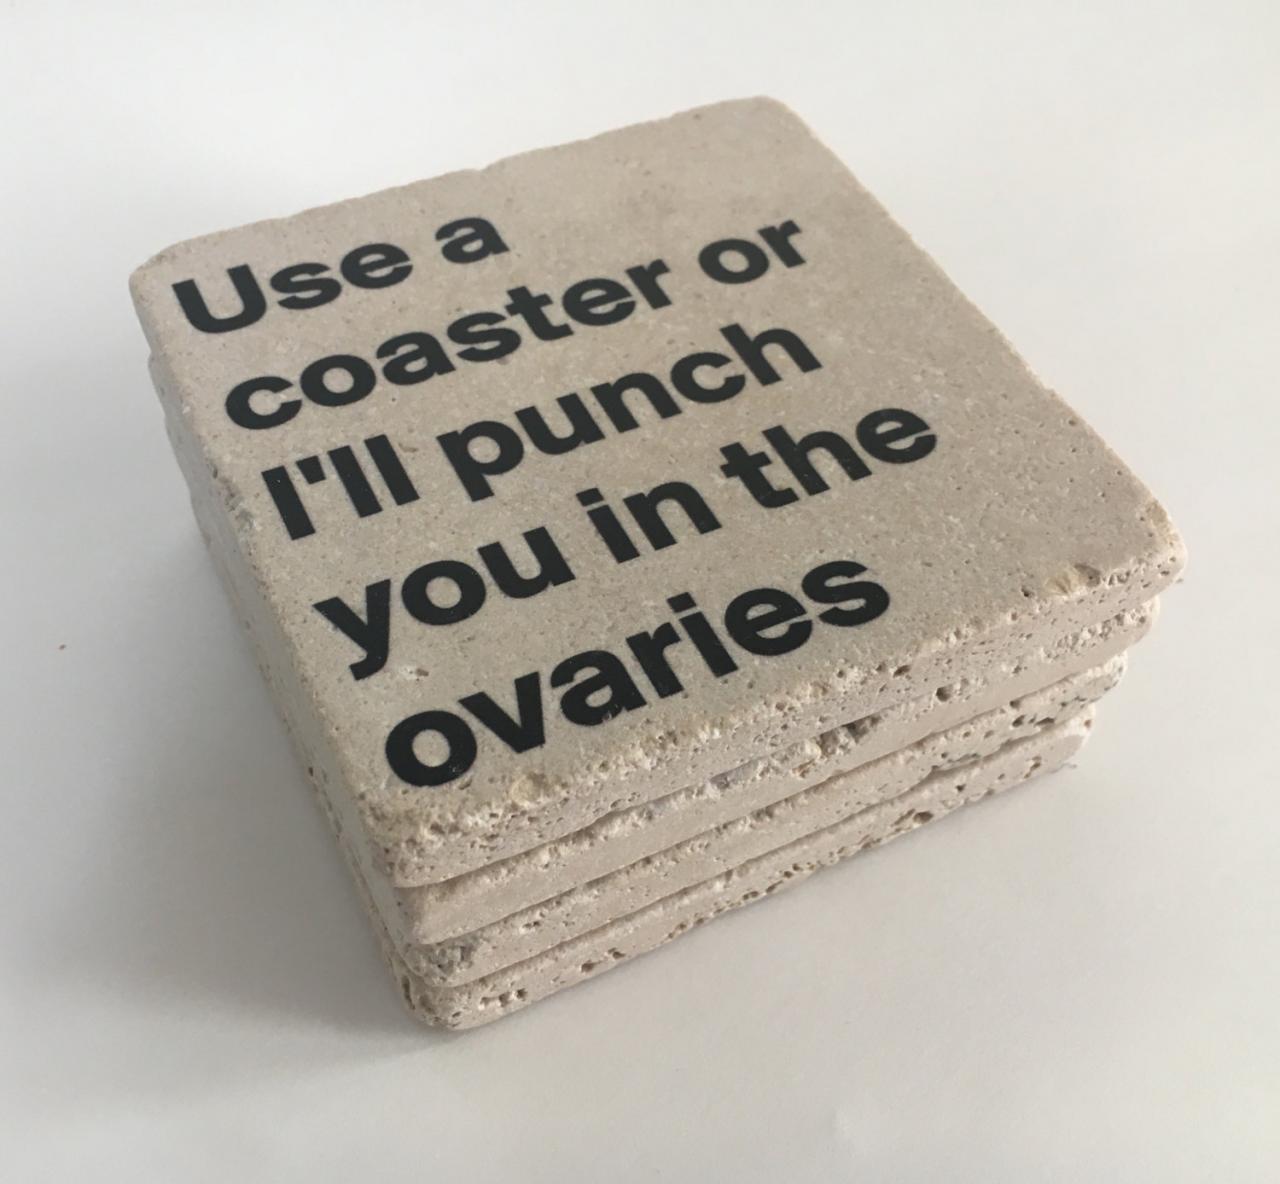 Use A Coasters Or I'll Punch You In The Ovaries, Funny Coasters Natural Stone Set Of 4